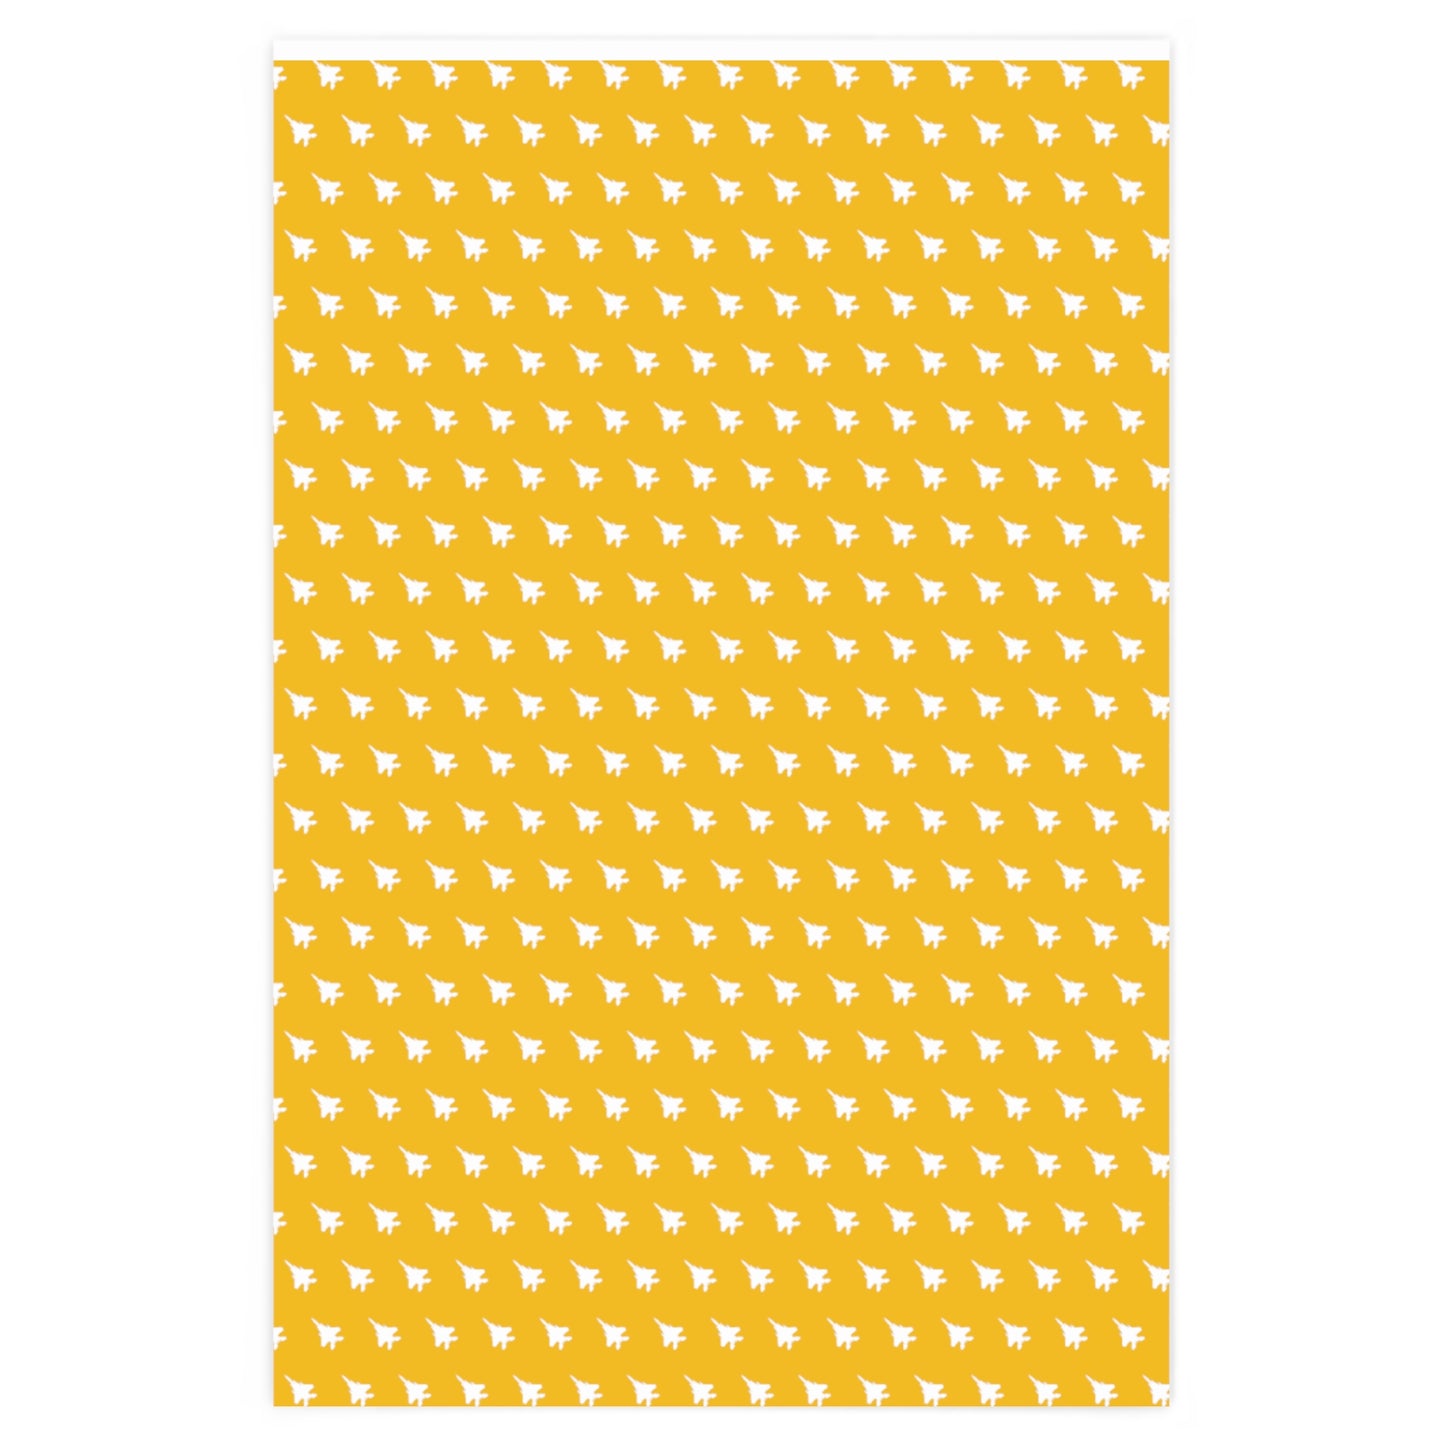 F-15 Wrapping Paper, Yellow